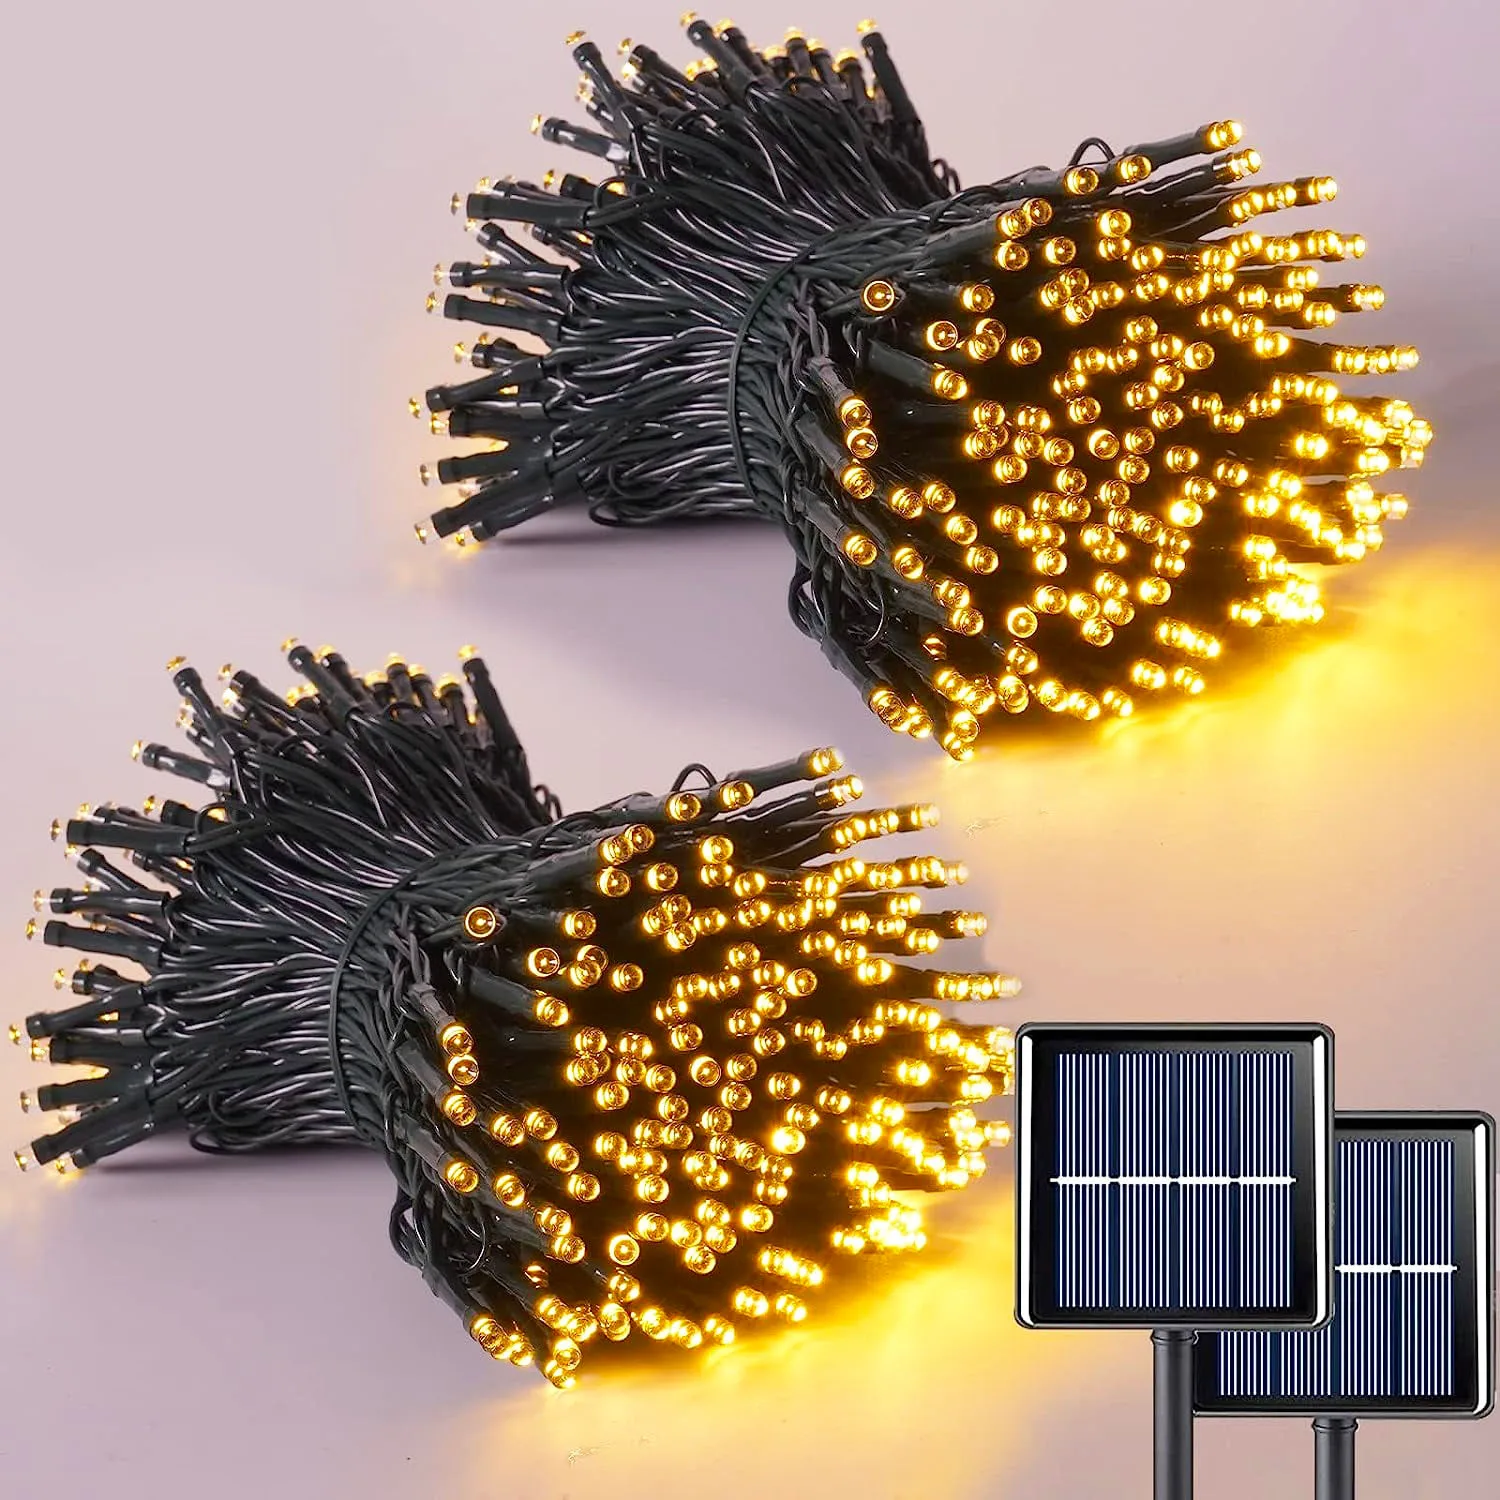 2Pack Solar String Lights Outdoor Waterproof Fairy Christmas Twinkle Lights with 8 Modes Tree Lights for Outdoor Garden Patio 2pack solar string lights outdoor waterproof fairy christmas twinkle lights with 8 modes tree lights for outdoor garden patio